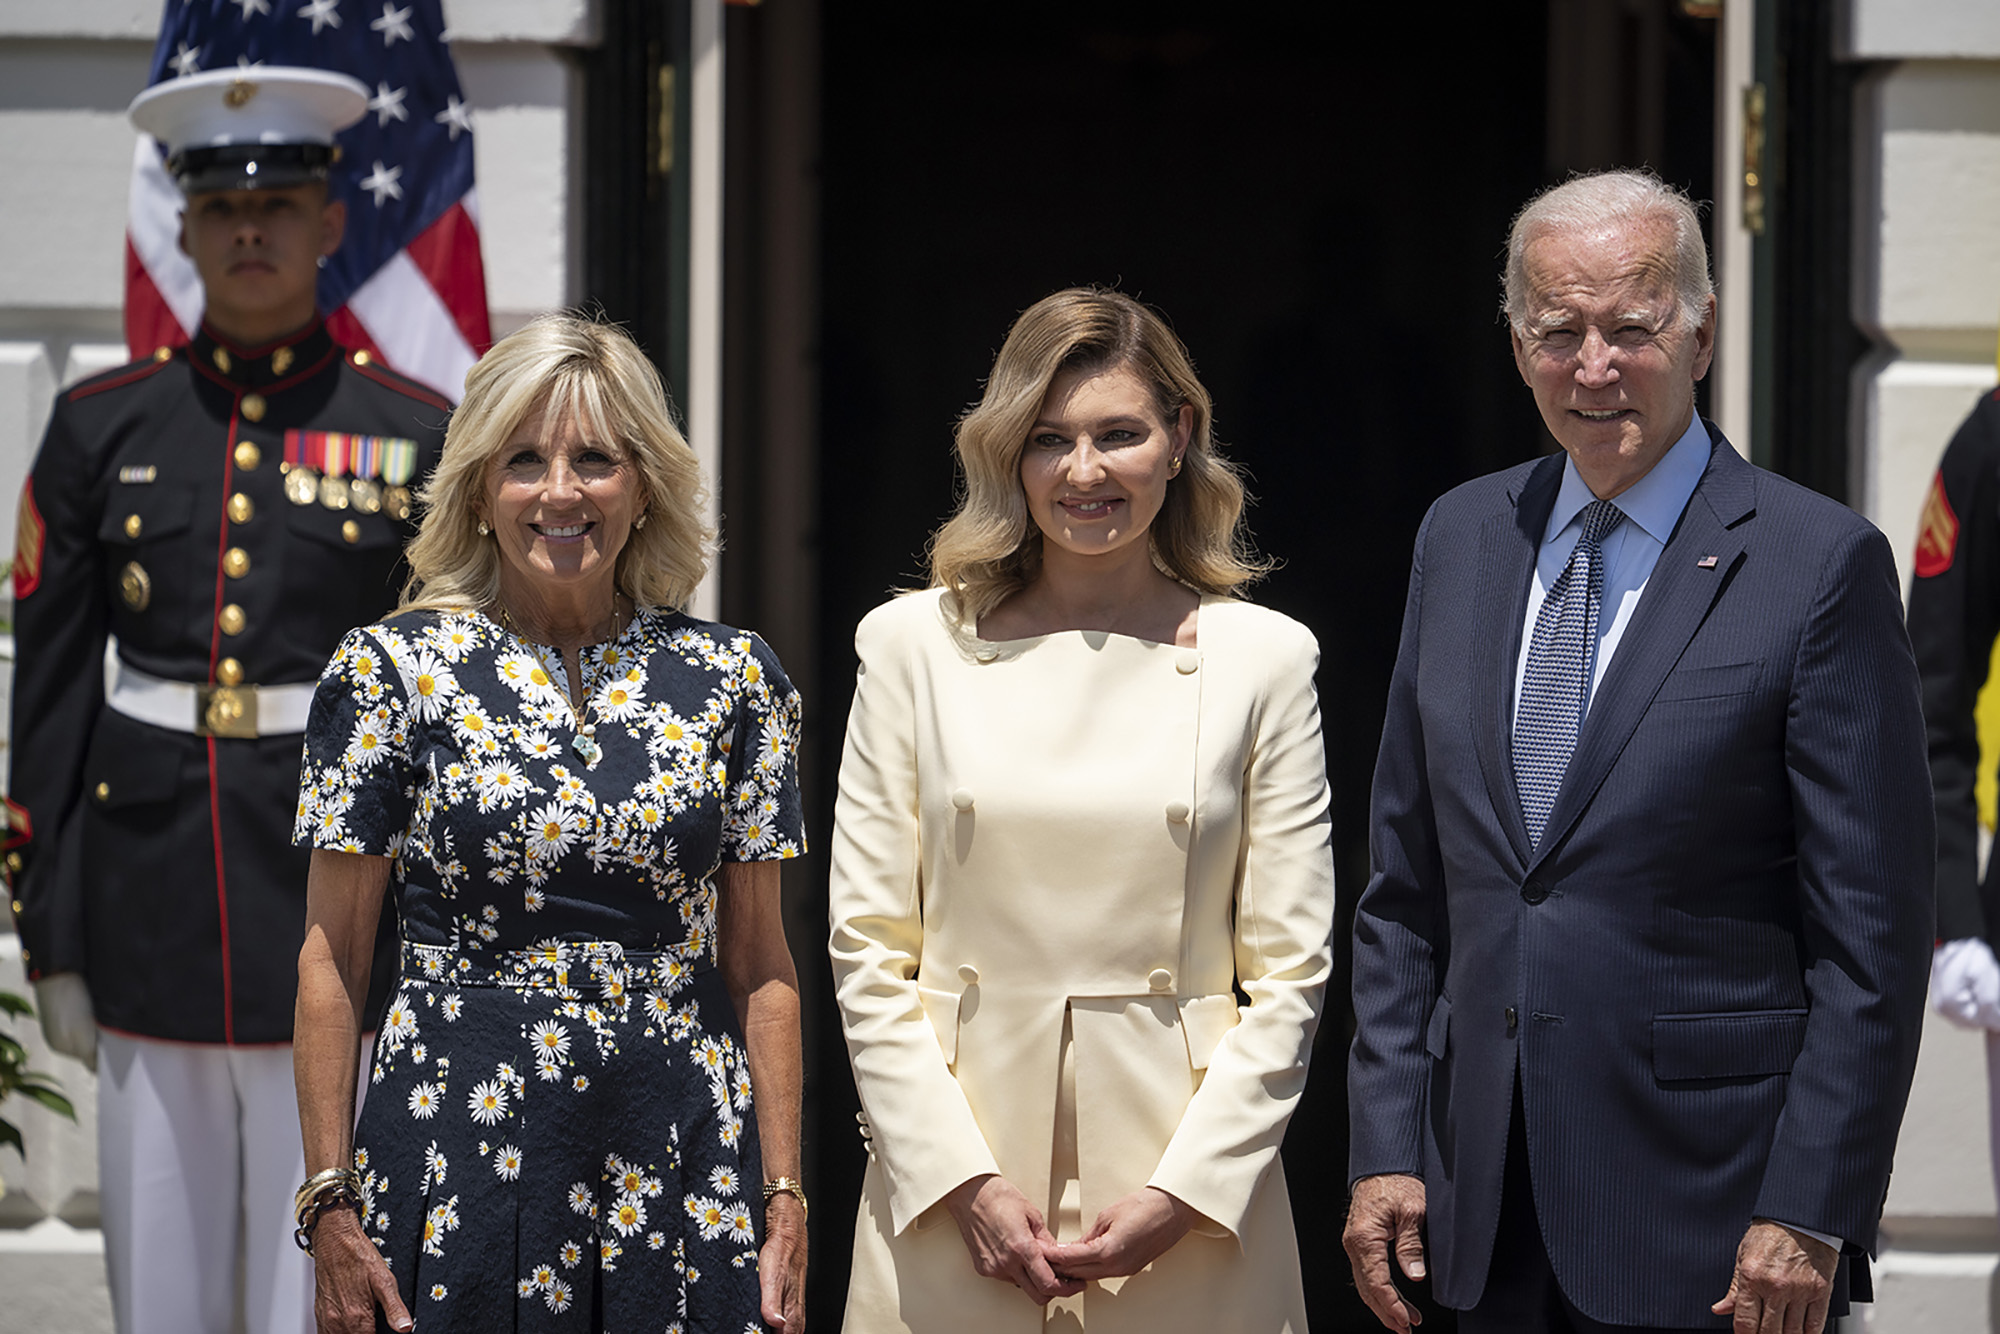 US first lady Jill Biden, first lady of Ukraine Olena Zelenska and US President Joe Biden pose for photos at the White House on Tuesday.